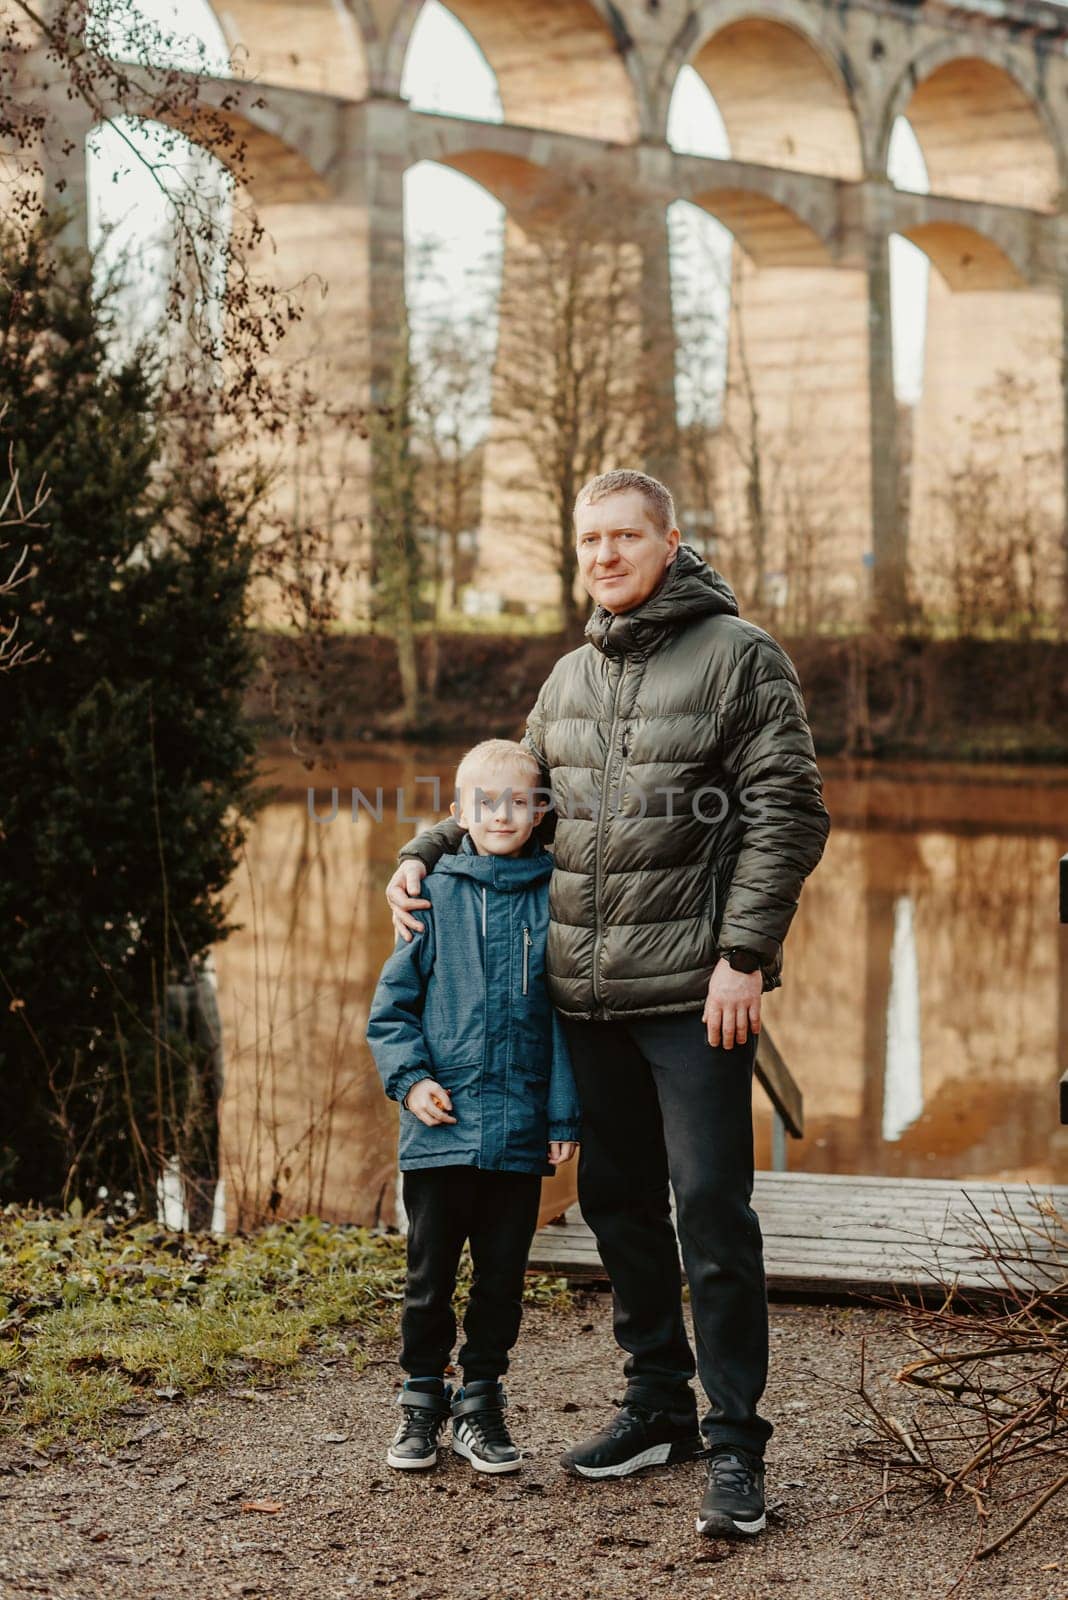 Family Serenity: Handsome 40-Year-Old Man and 8-Year-Old Son Amidst the Beauty of Neckar River and Historic Bridge, Bietigheim-Bissingen, Germany, Winter or Autumn by Andrii_Ko